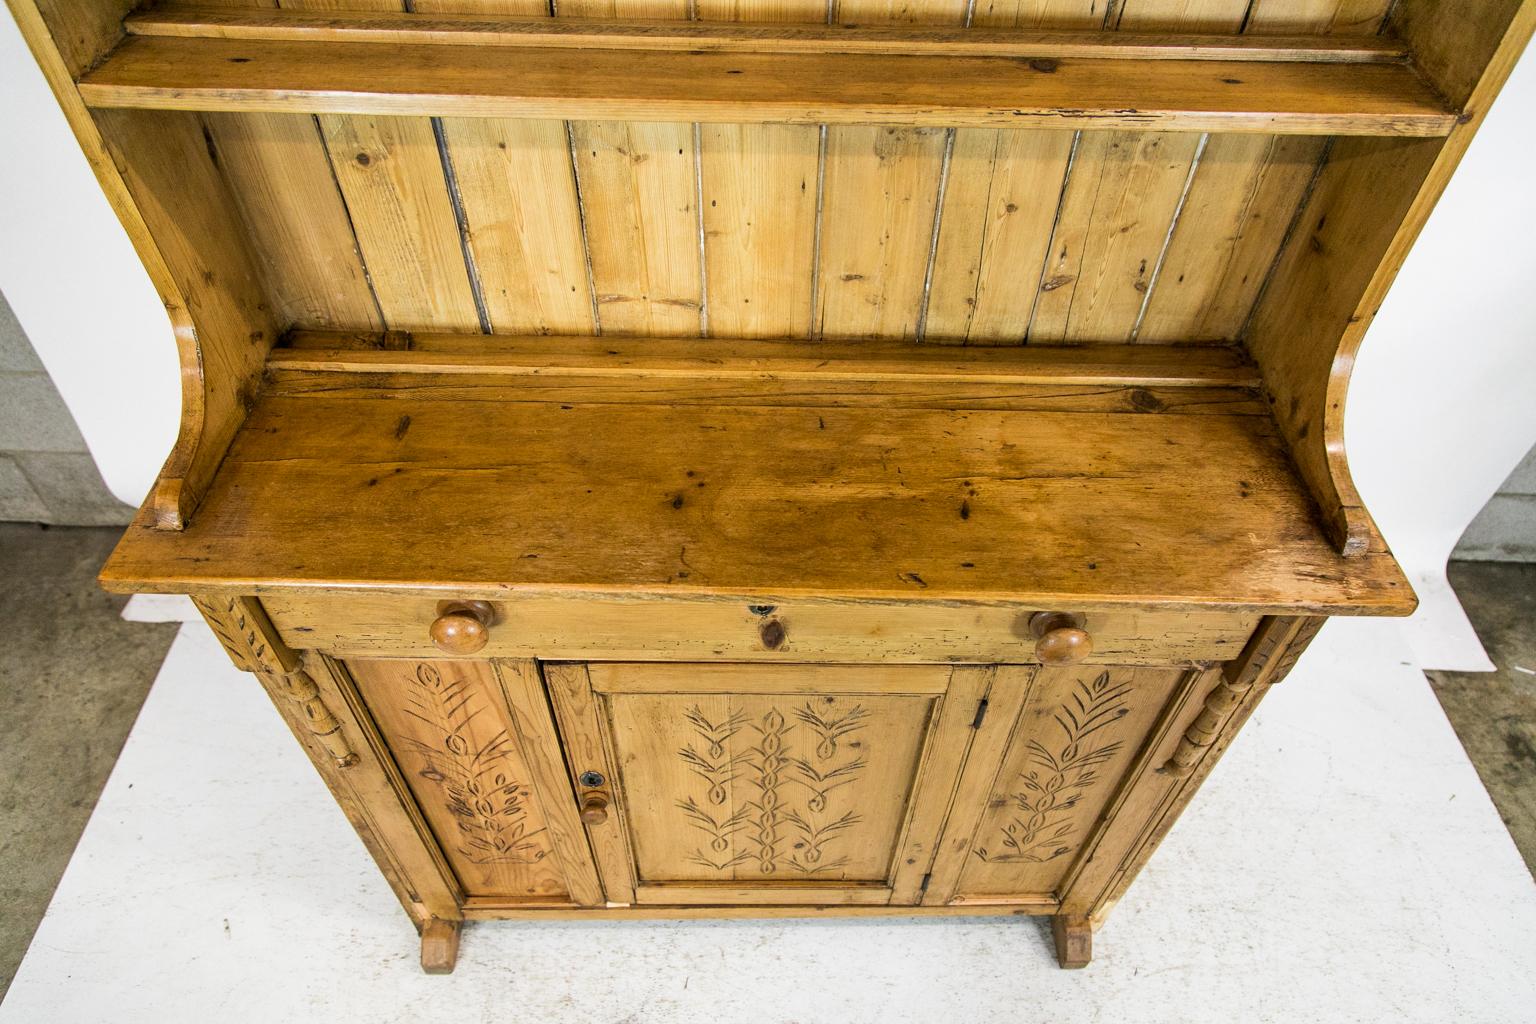 This pine cupboard has two shelves and a serving platform that all have an attached plate rail. The crown has a heavy dentil molding and the lower door and side panels have incised carvings of stylized leaf and flower designs. The wooden knobs and